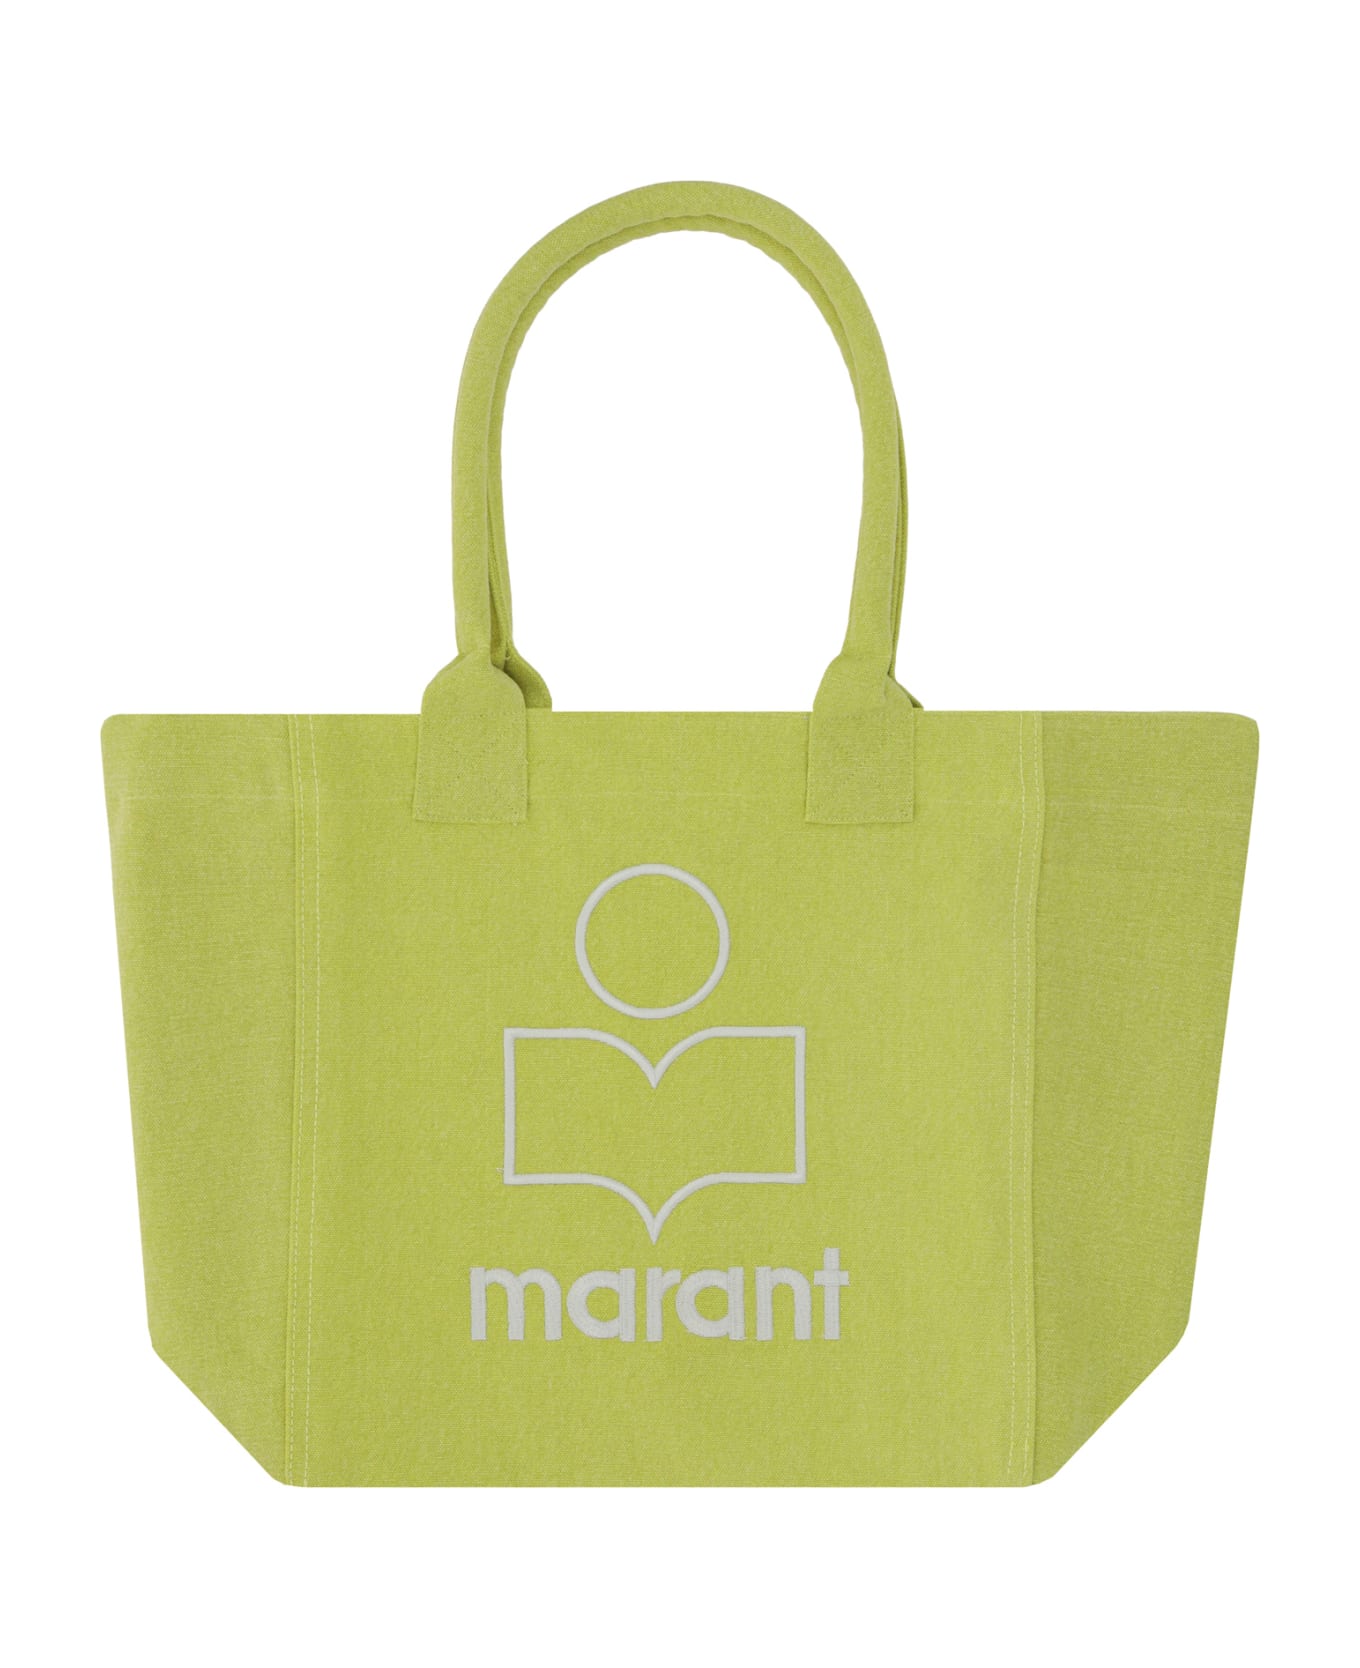 Isabel Marant Yenky Logo Embroidered Tote Bag - Sunlight トートバッグ